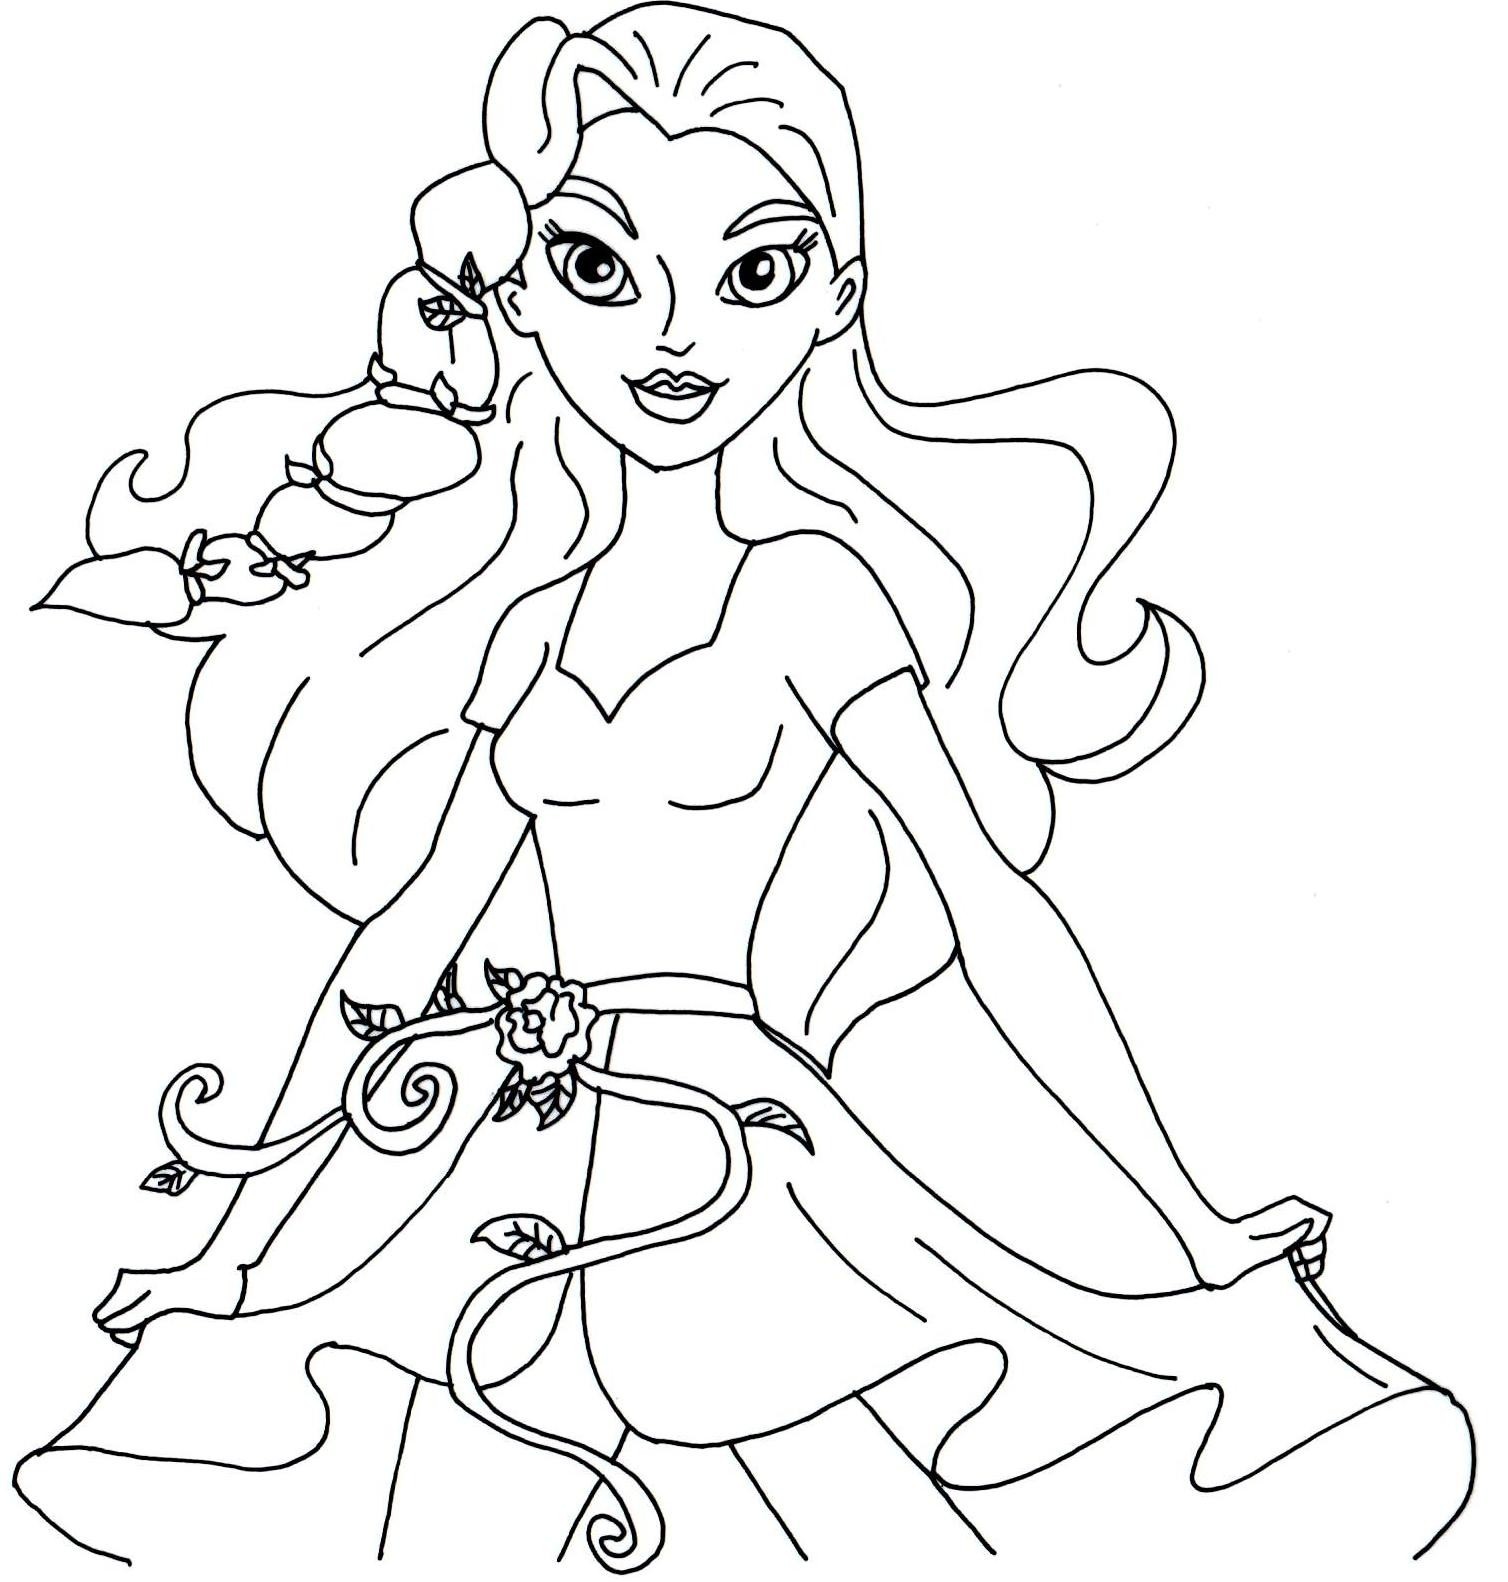 Download DC Superhero Girls Coloring Pages - Best Coloring Pages ...